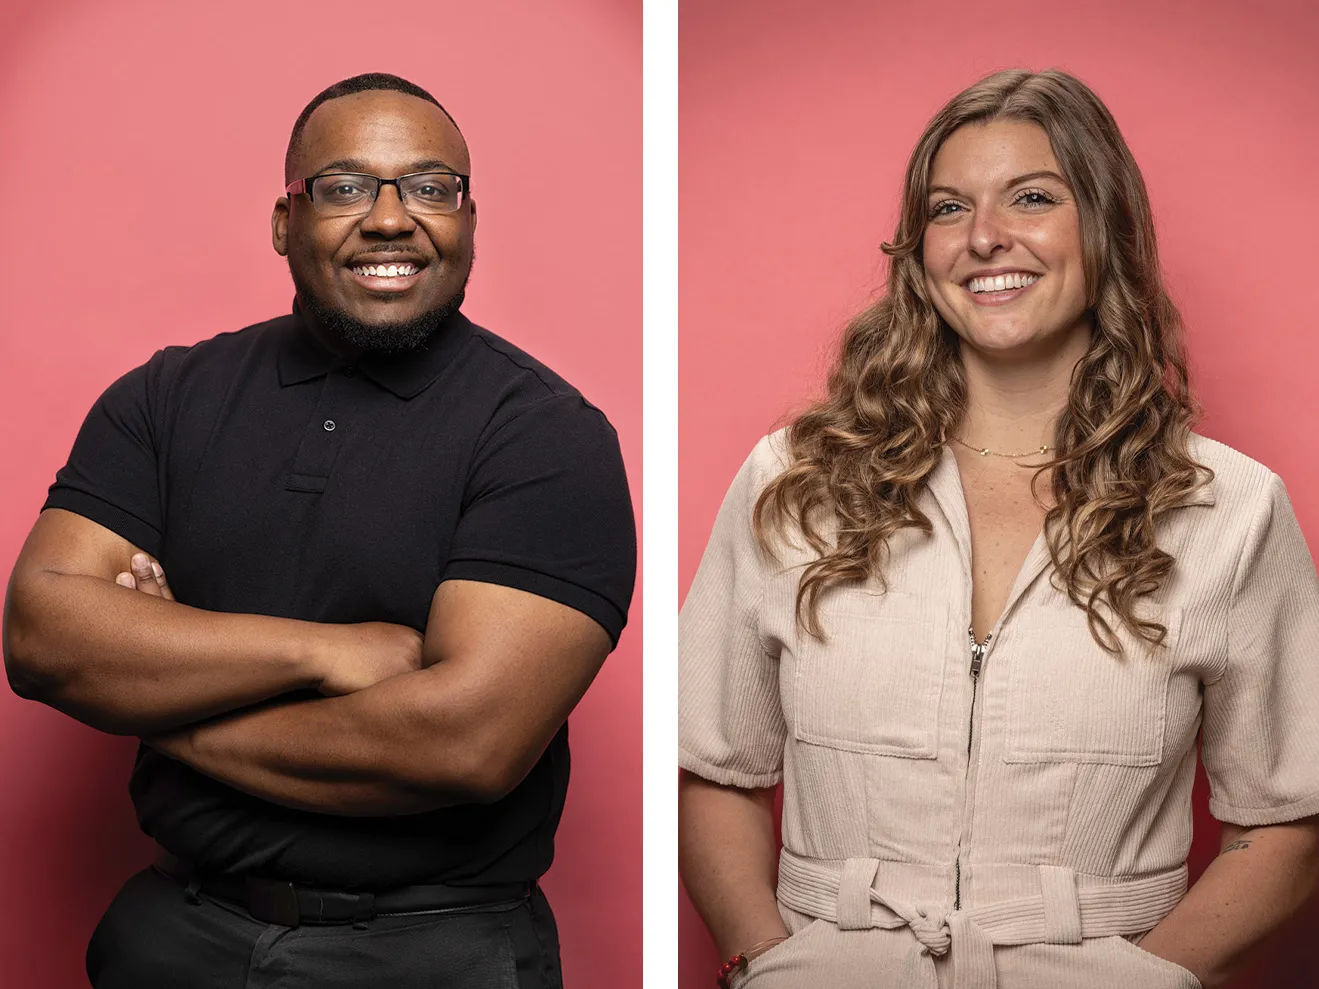 Three alumni are shown in tall portraits. They are Keshawn Harper, a black man with glasses; Ally Pesta, a white woman with long hair; and Rick Milenthal, a white man with shaved head. They are all dressed smartly and smile in a way that makes you think they’d be a good friend.